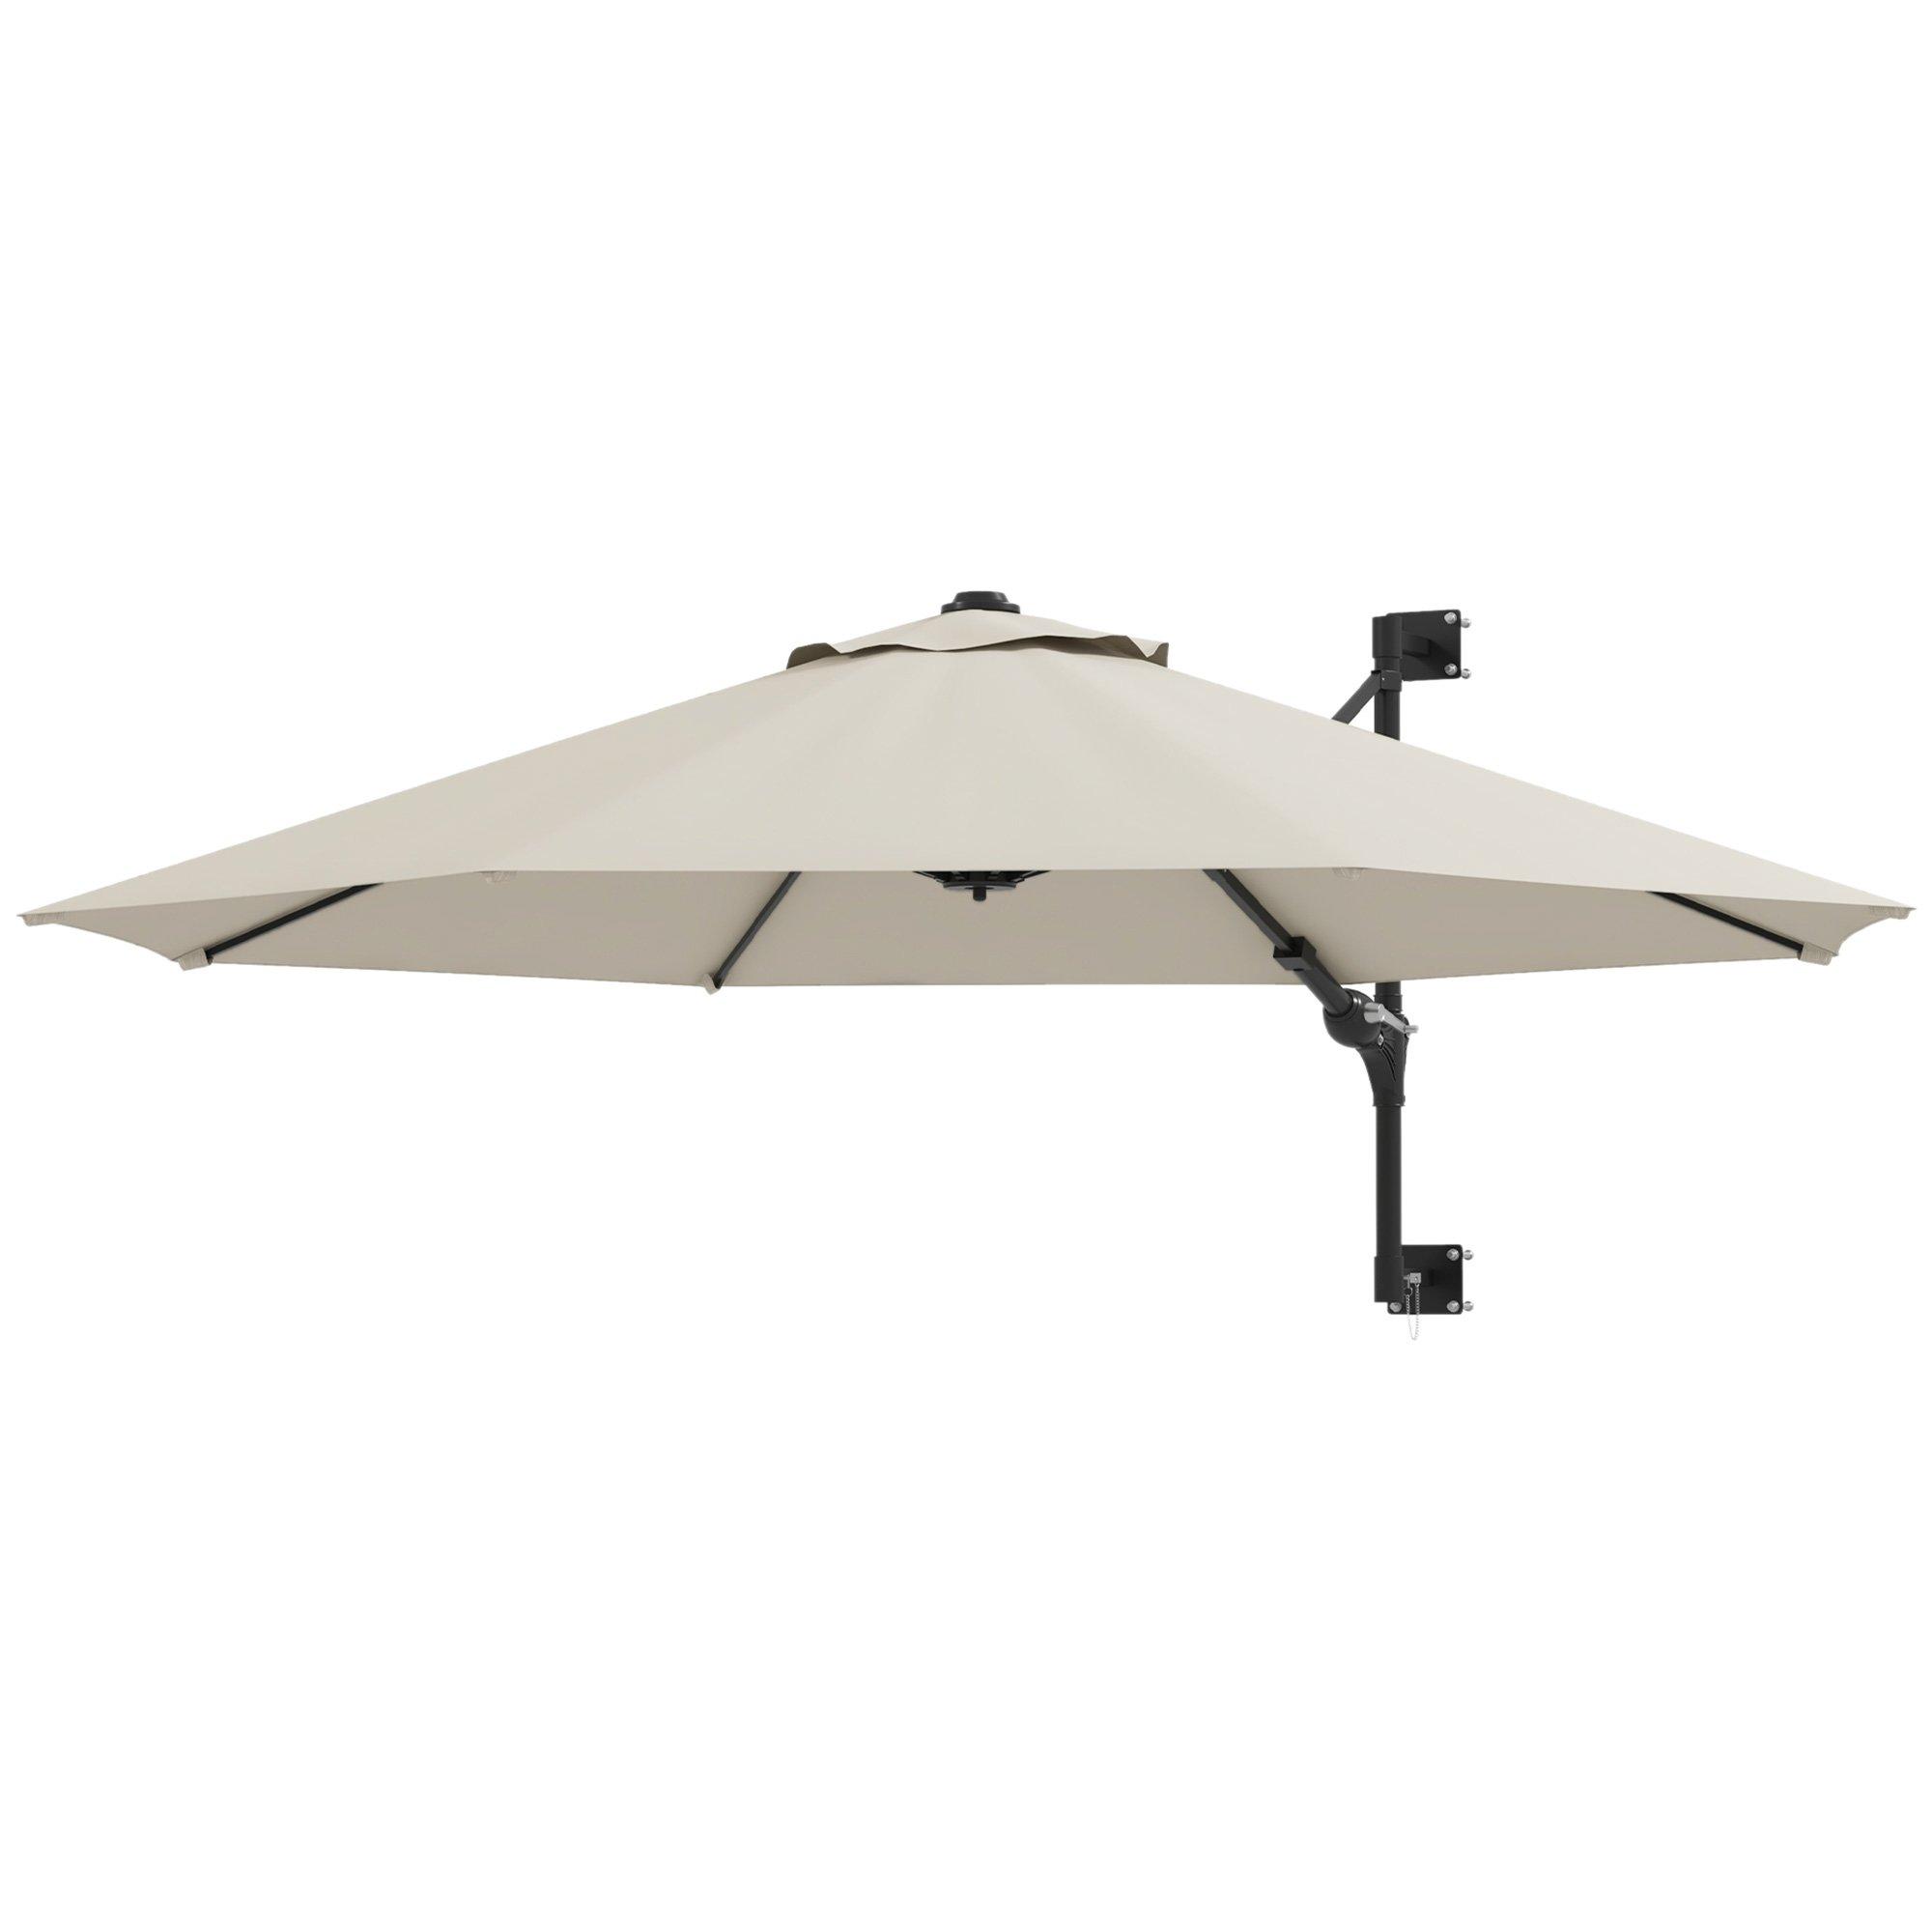 Outdoor Parasol Umbrella with Vent, Rotate, Wall Mounted, 8 Ribs